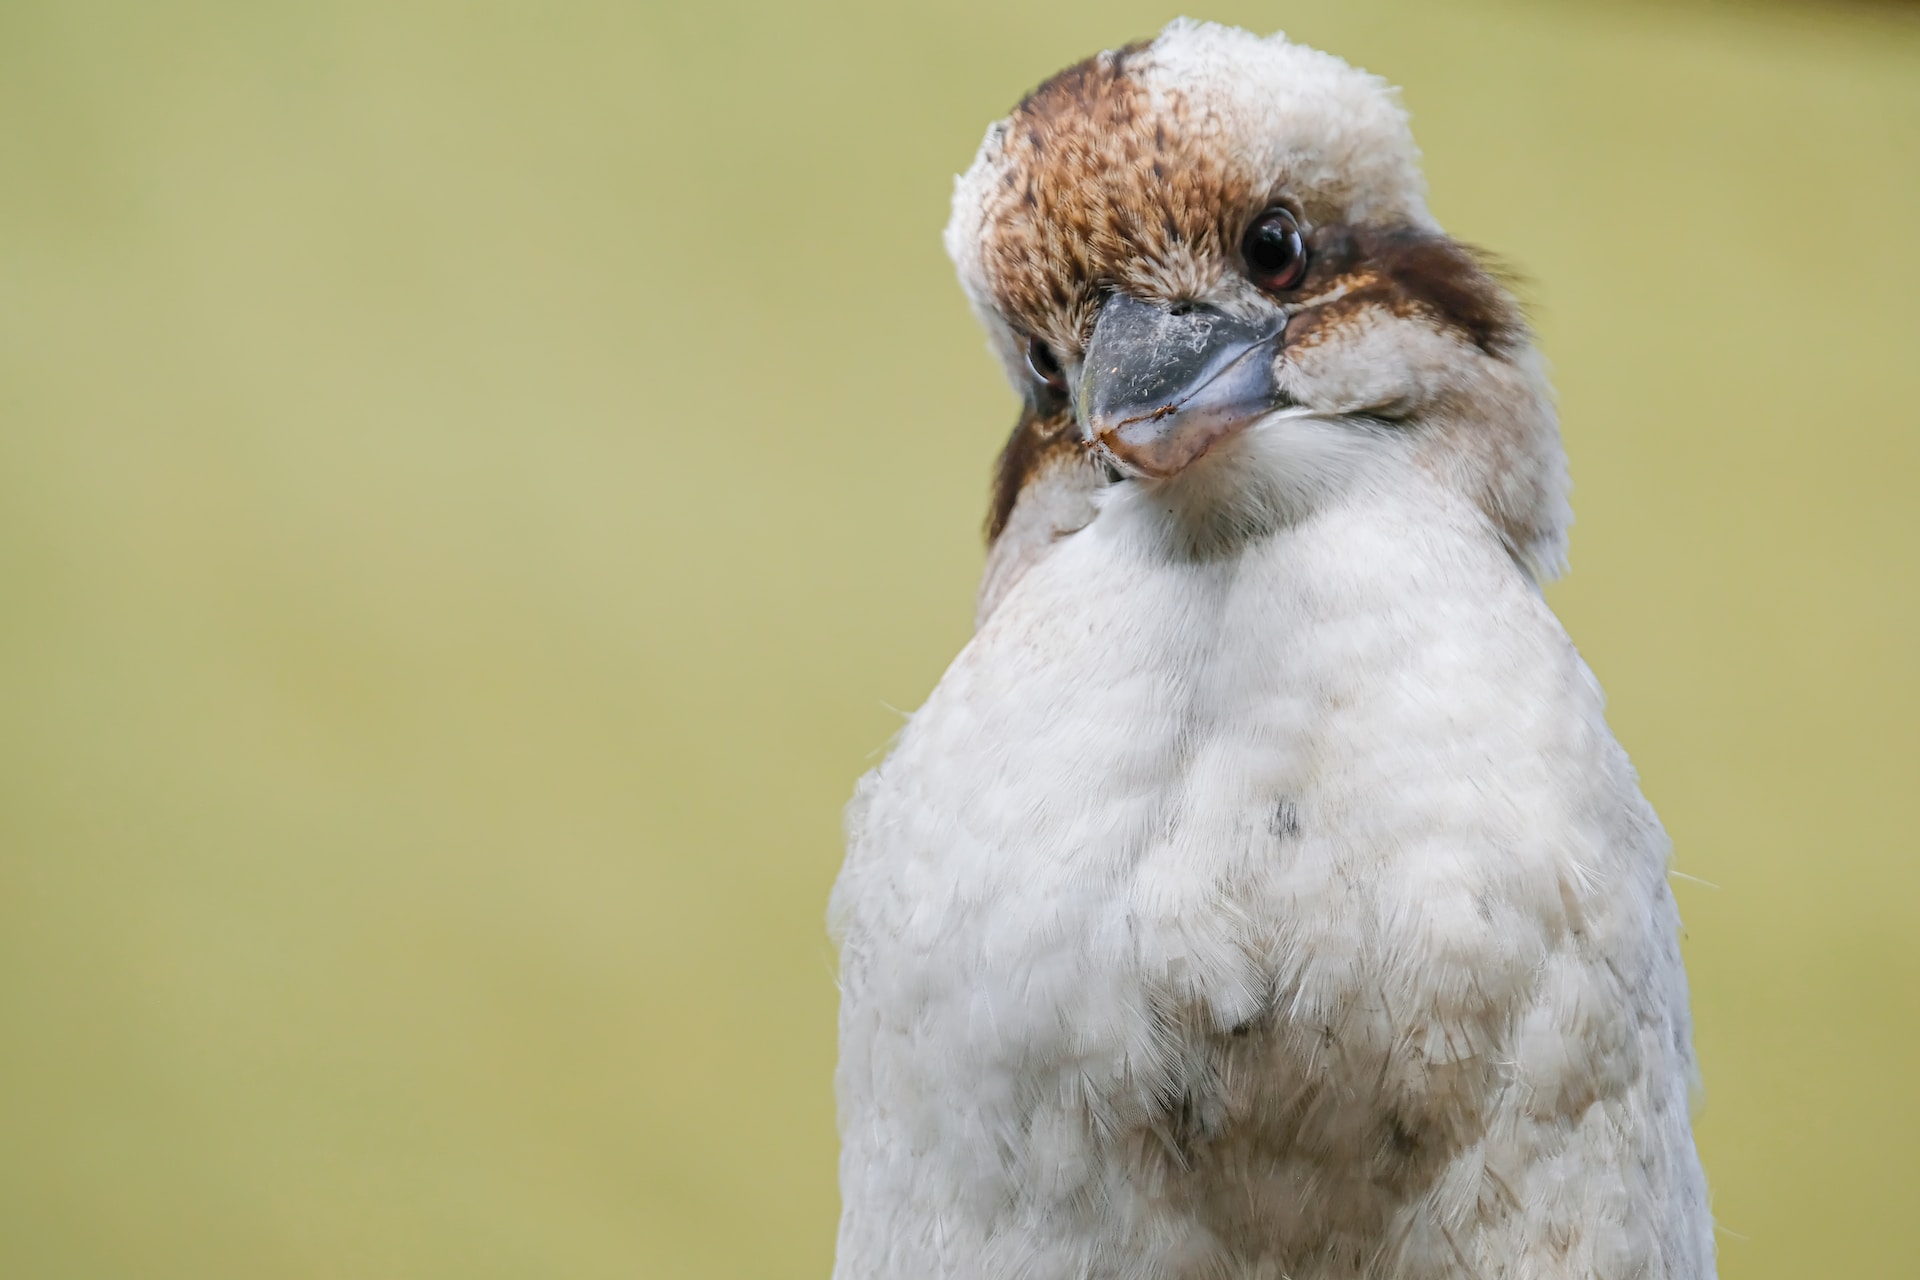 The kookaburra is a fascinating little but that sadly faces environmental and physical threats.